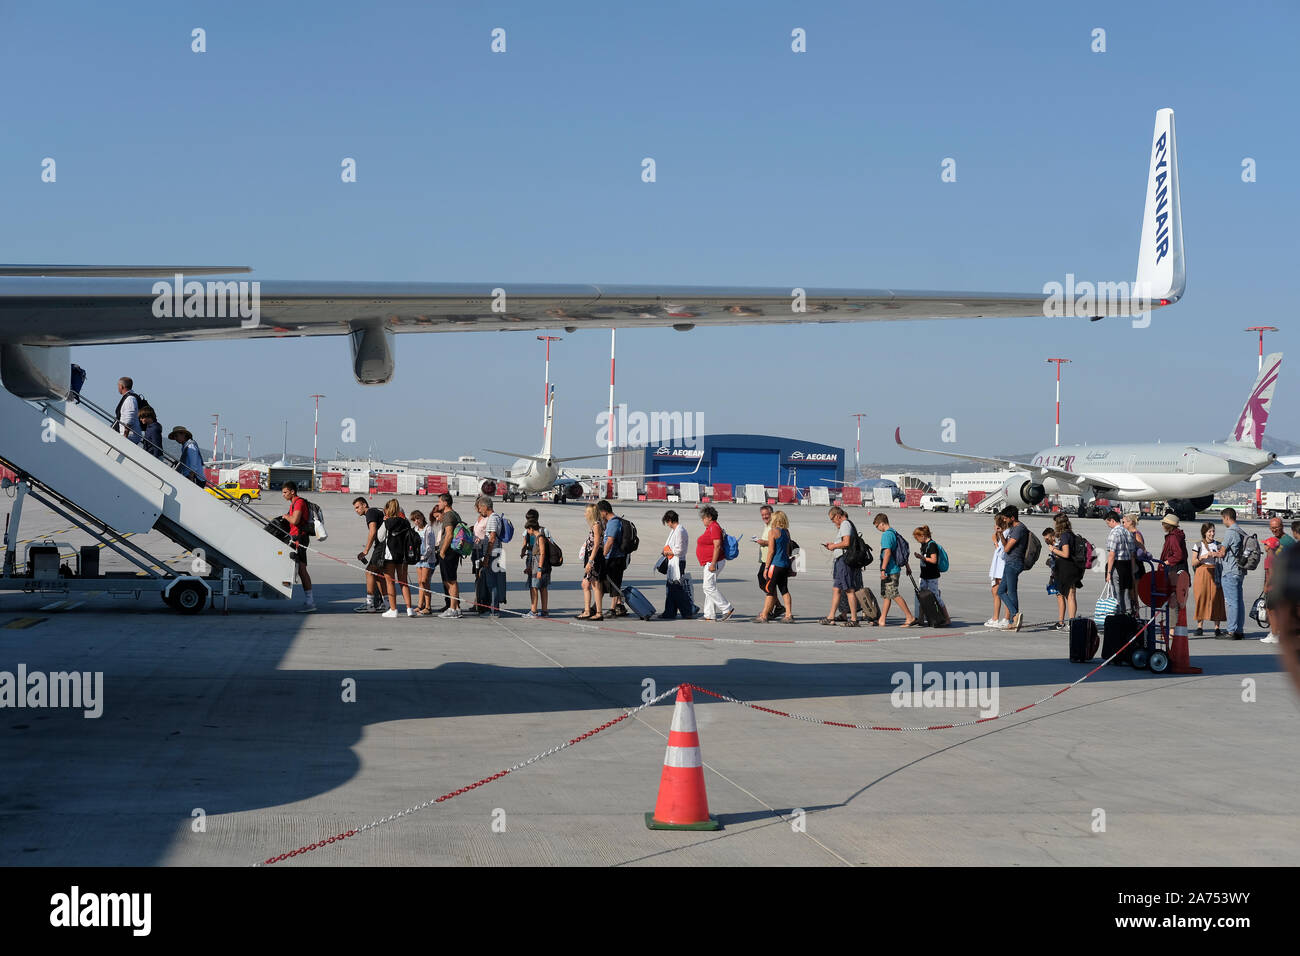 Passengers queuing up on the tarmac to board a Ryanair plane. Stock Photo